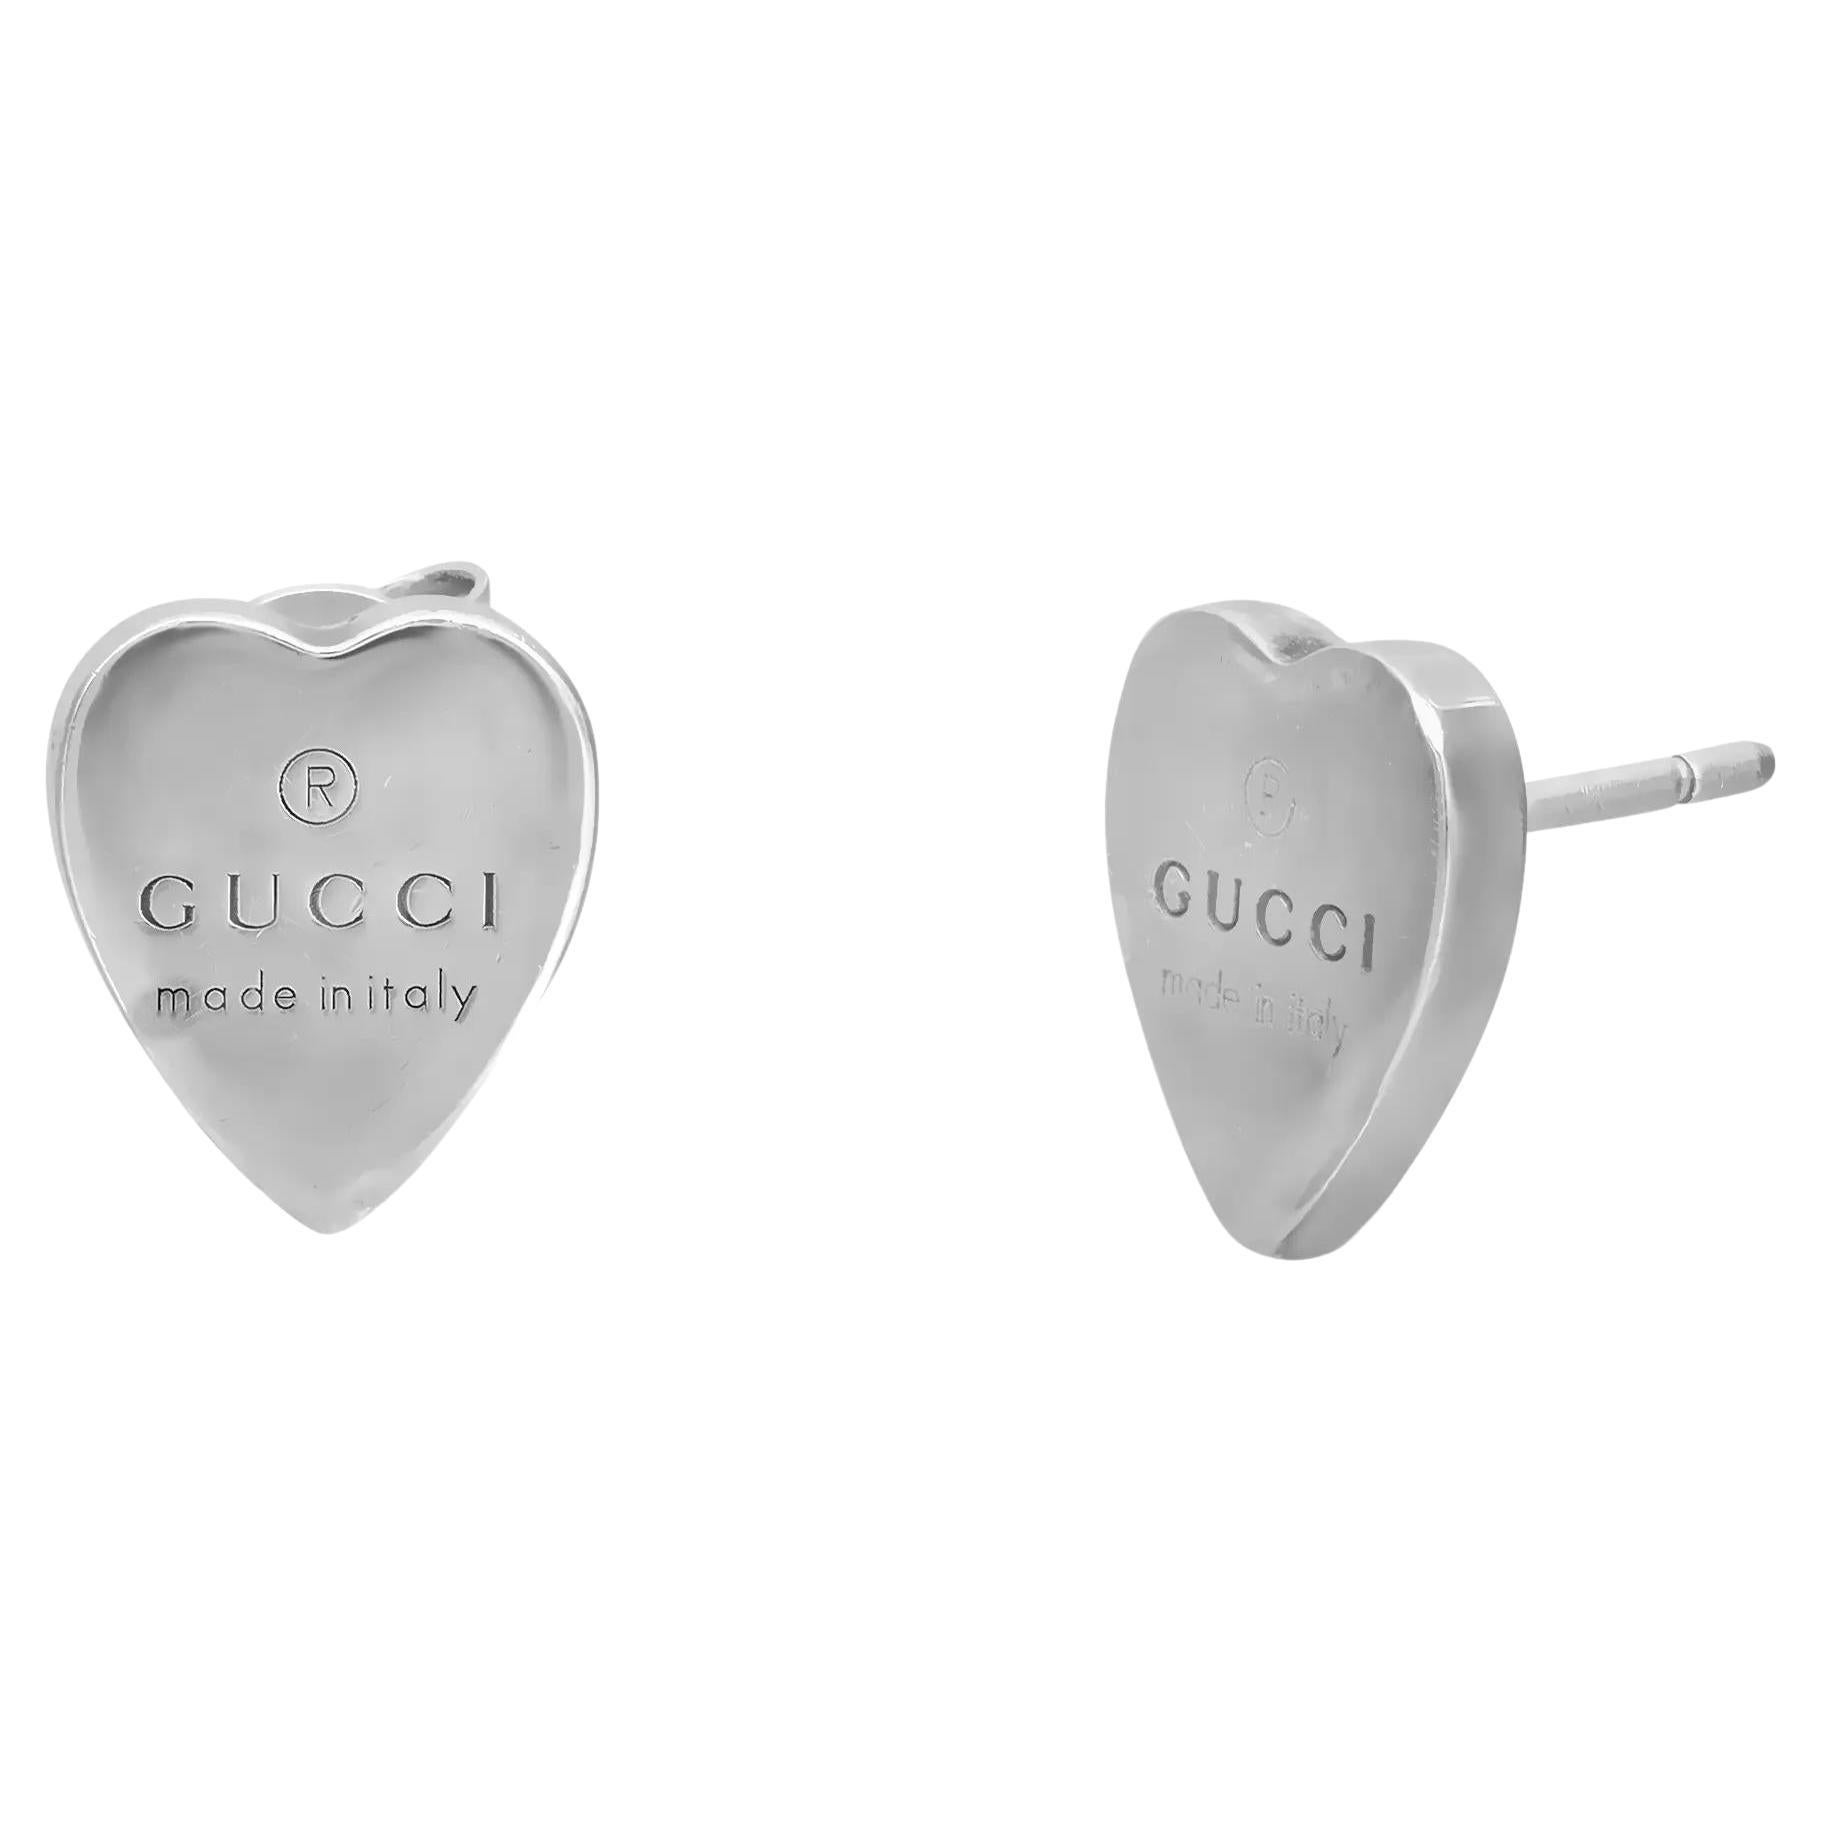 Gucci G Logo Hoop Earrings Sterling Silver 925 Made in Italy